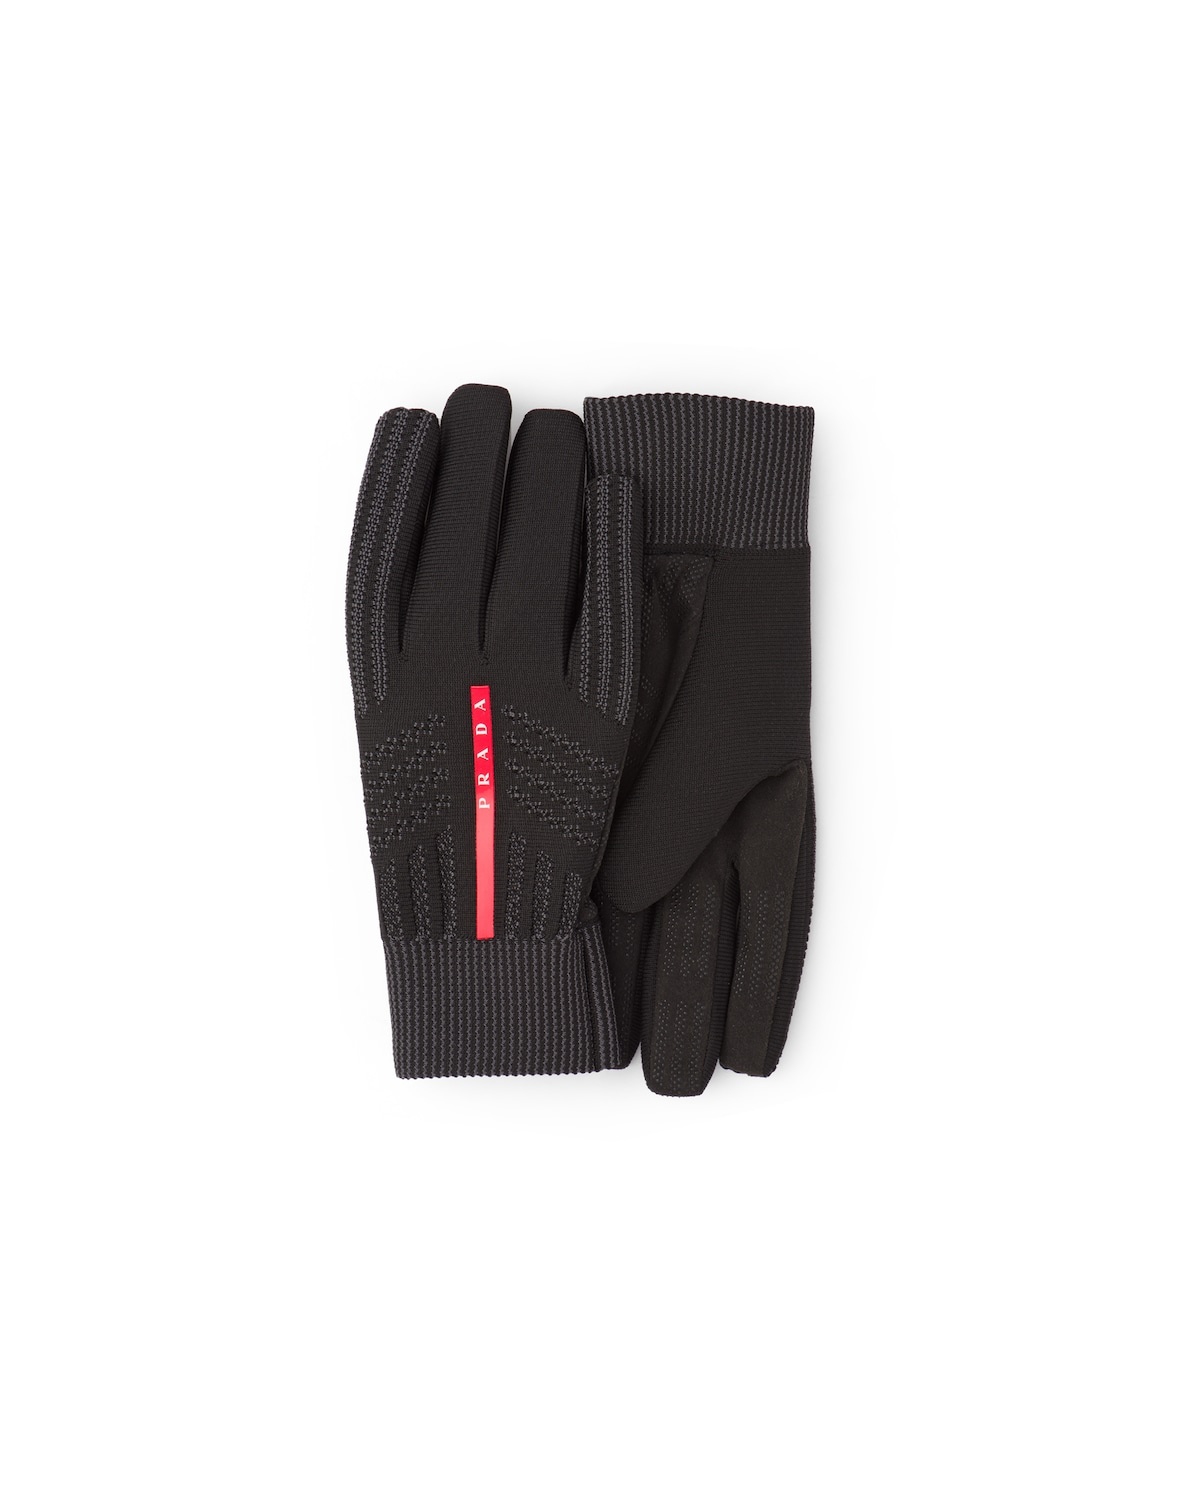 Windproof knit gloves - 1